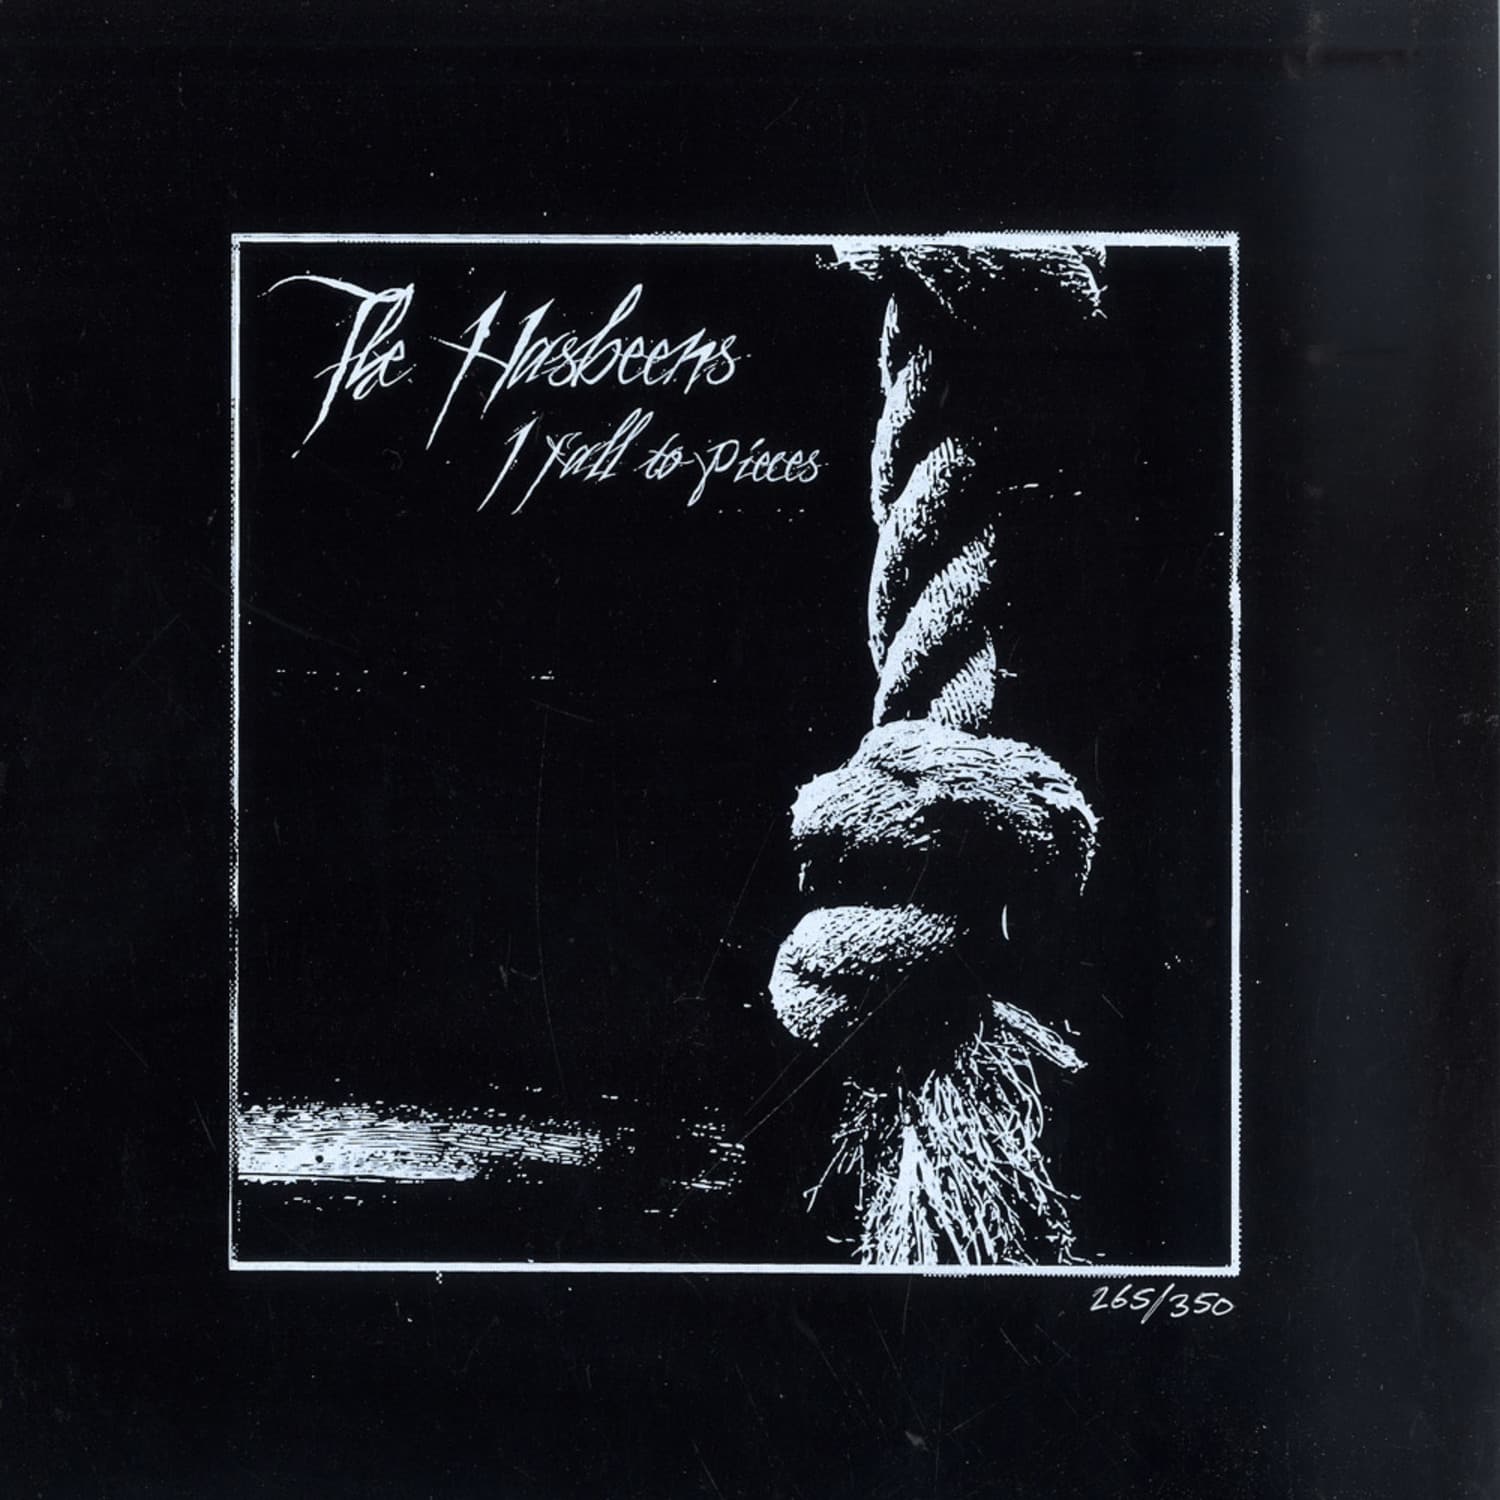 The Hasbeens - I FALL TO PIECES